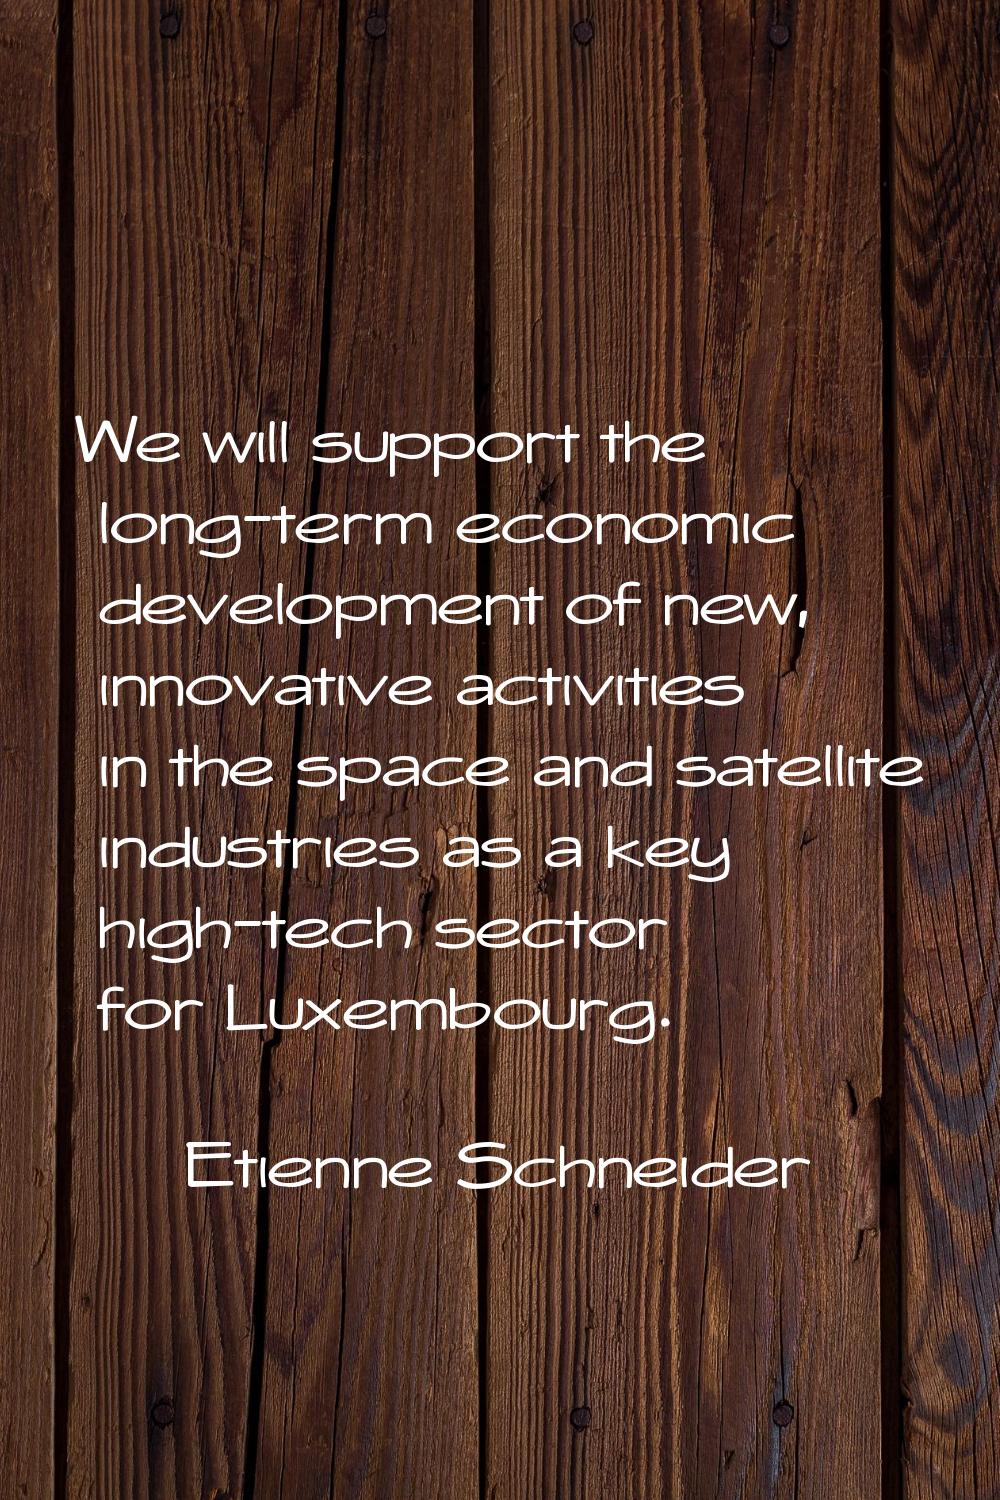 We will support the long-term economic development of new, innovative activities in the space and s